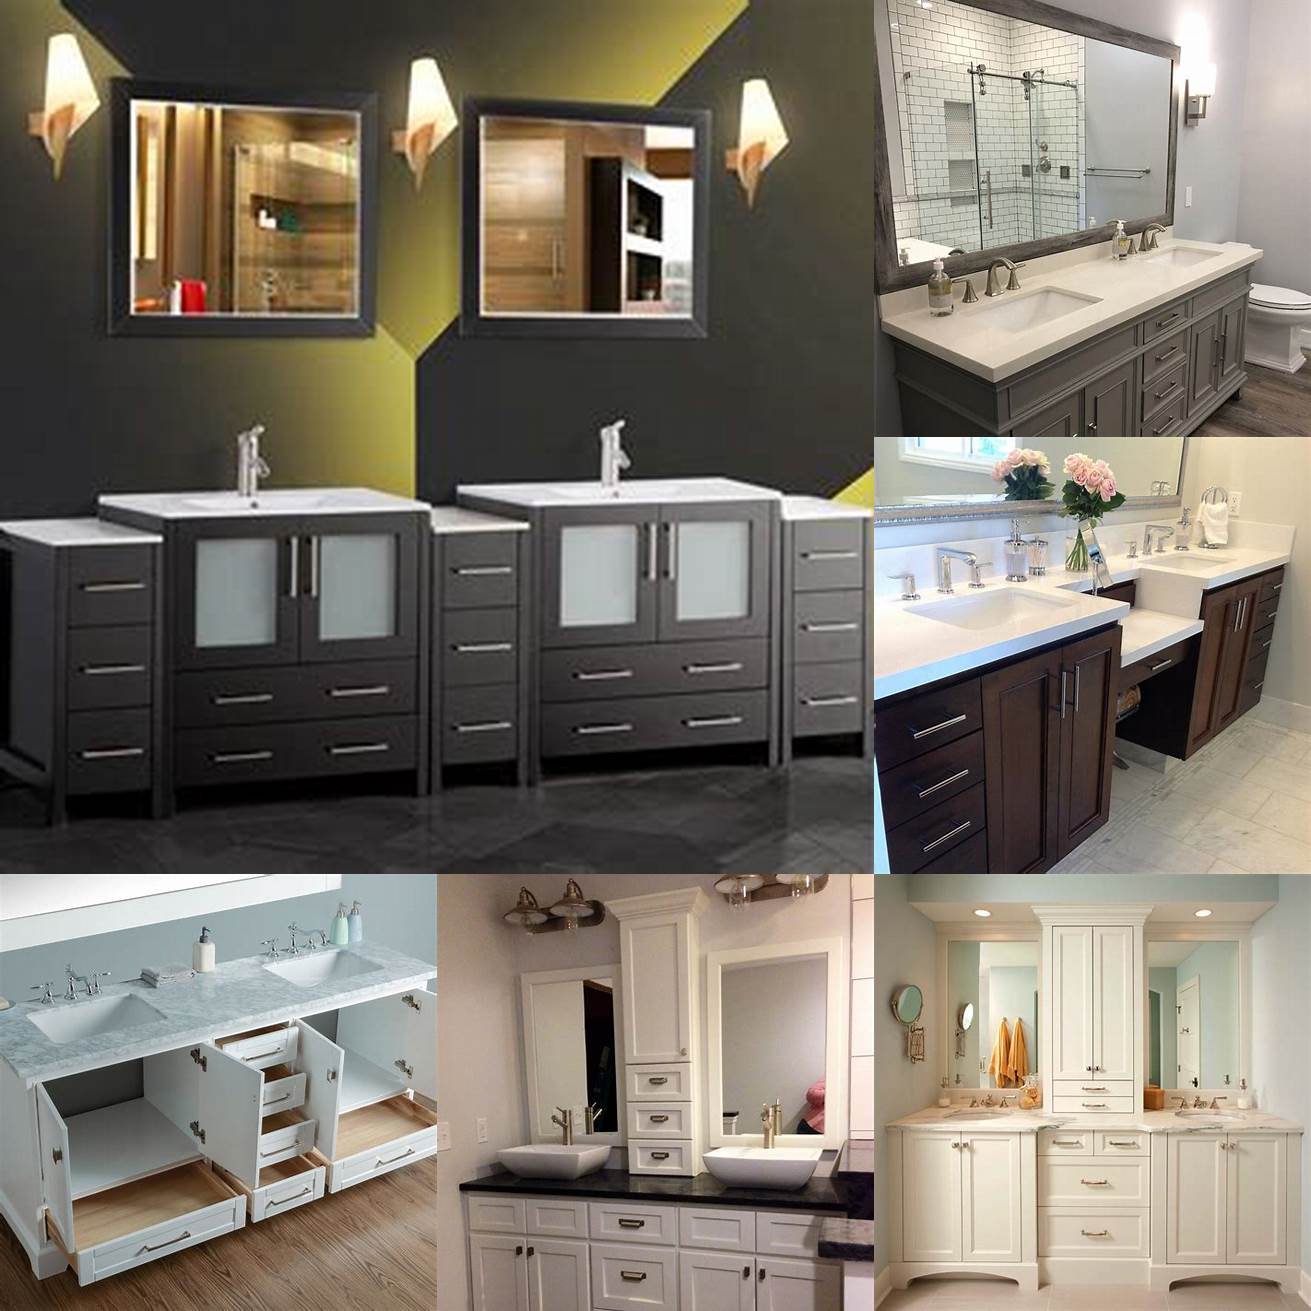 Think About Storage Look for a dual sink bathroom vanity with ample storage space for your toiletries and other bathroom essentials